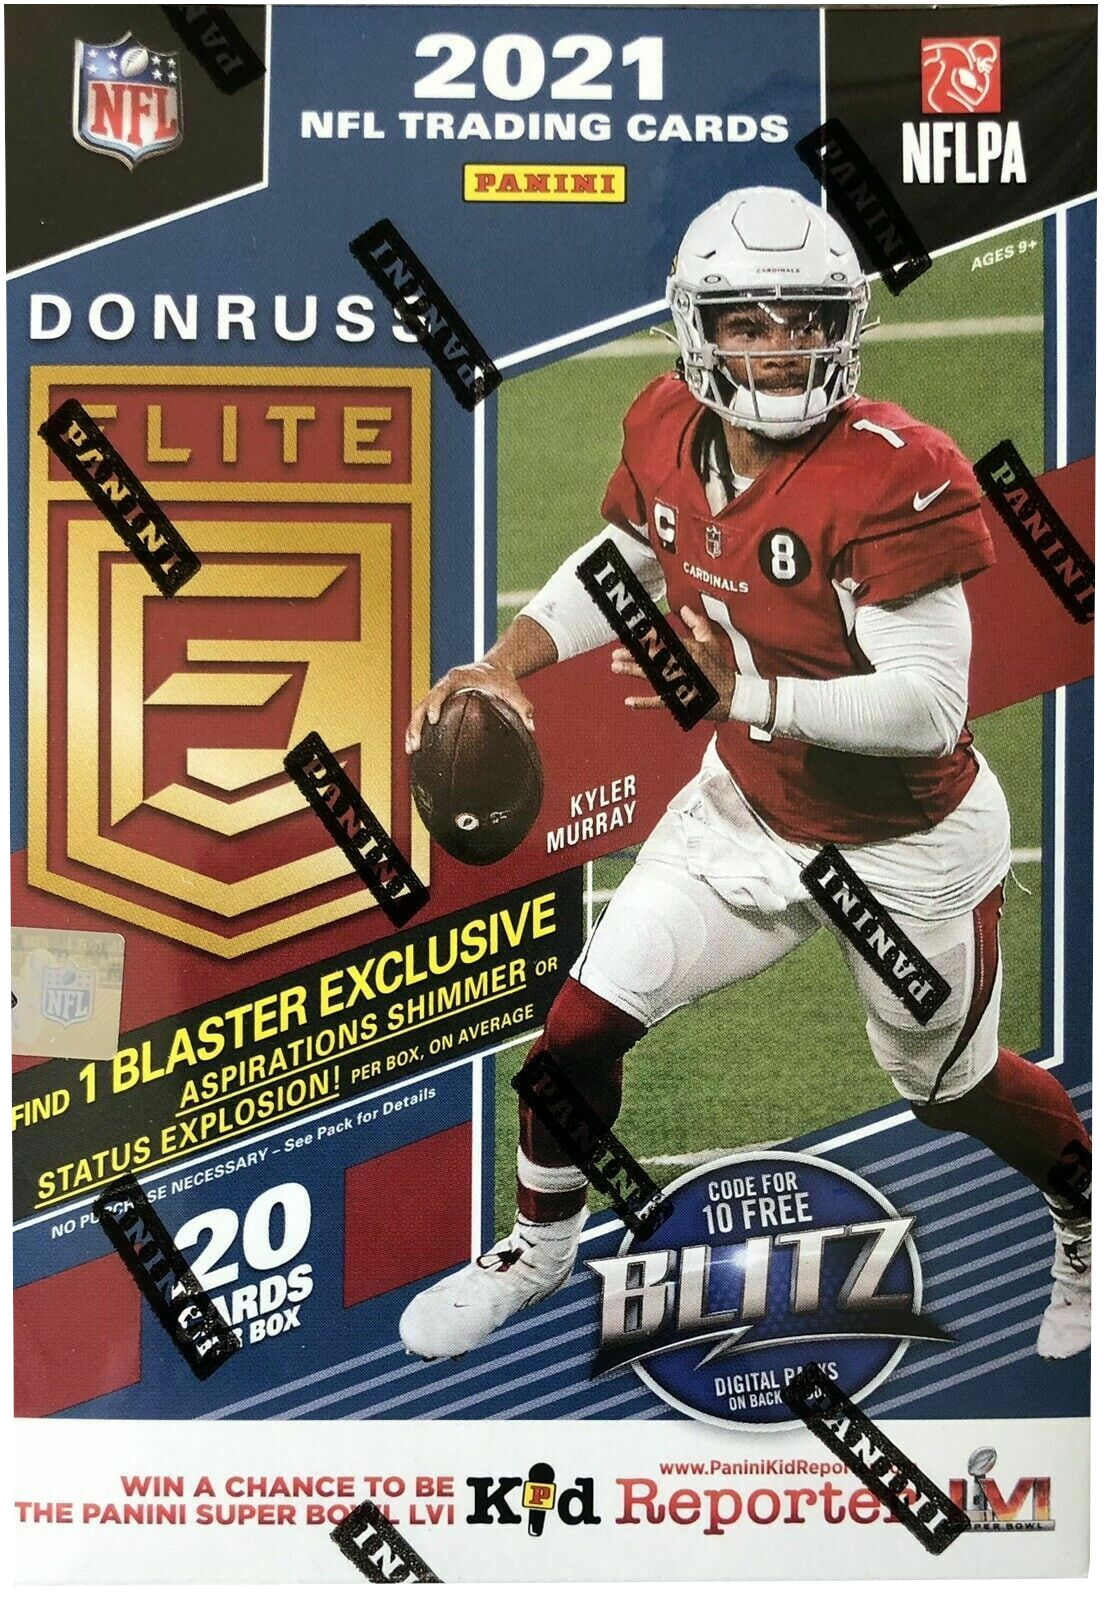 2021 Panini Donruss Elite NFL Football Trading Cards Blaster Box- 20 Cards - Find Green Parallels